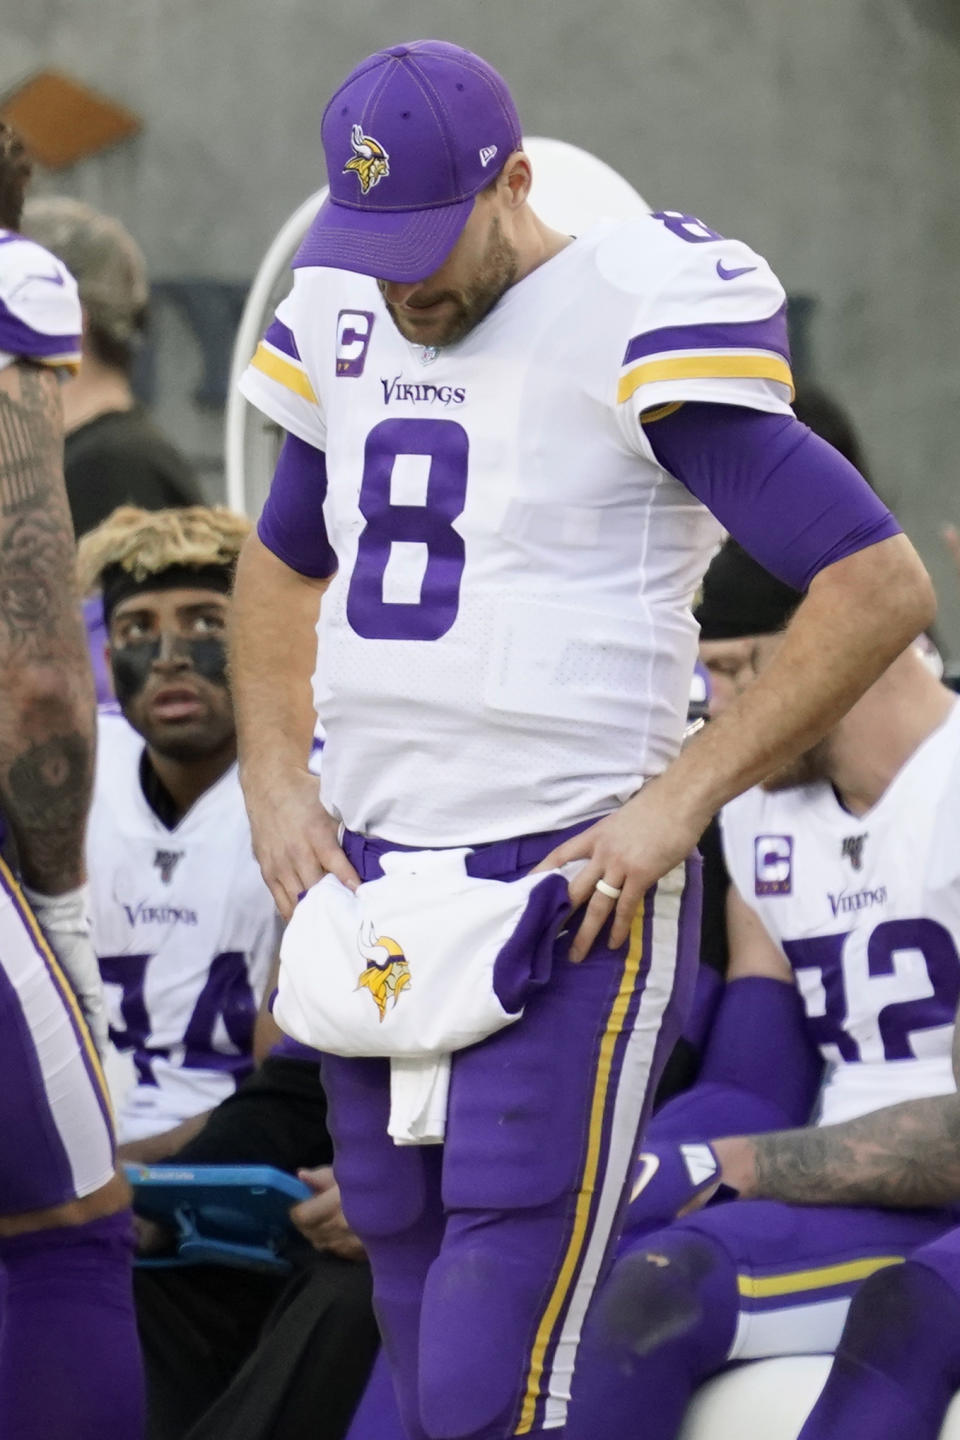 Minnesota Vikings quarterback Kirk Cousins (8) stands on the sideline during the second half of an NFL divisional playoff football game against the San Francisco 49ers, Saturday, Jan. 11, 2020, in Santa Clara, Calif. (AP Photo/Tony Avelar)